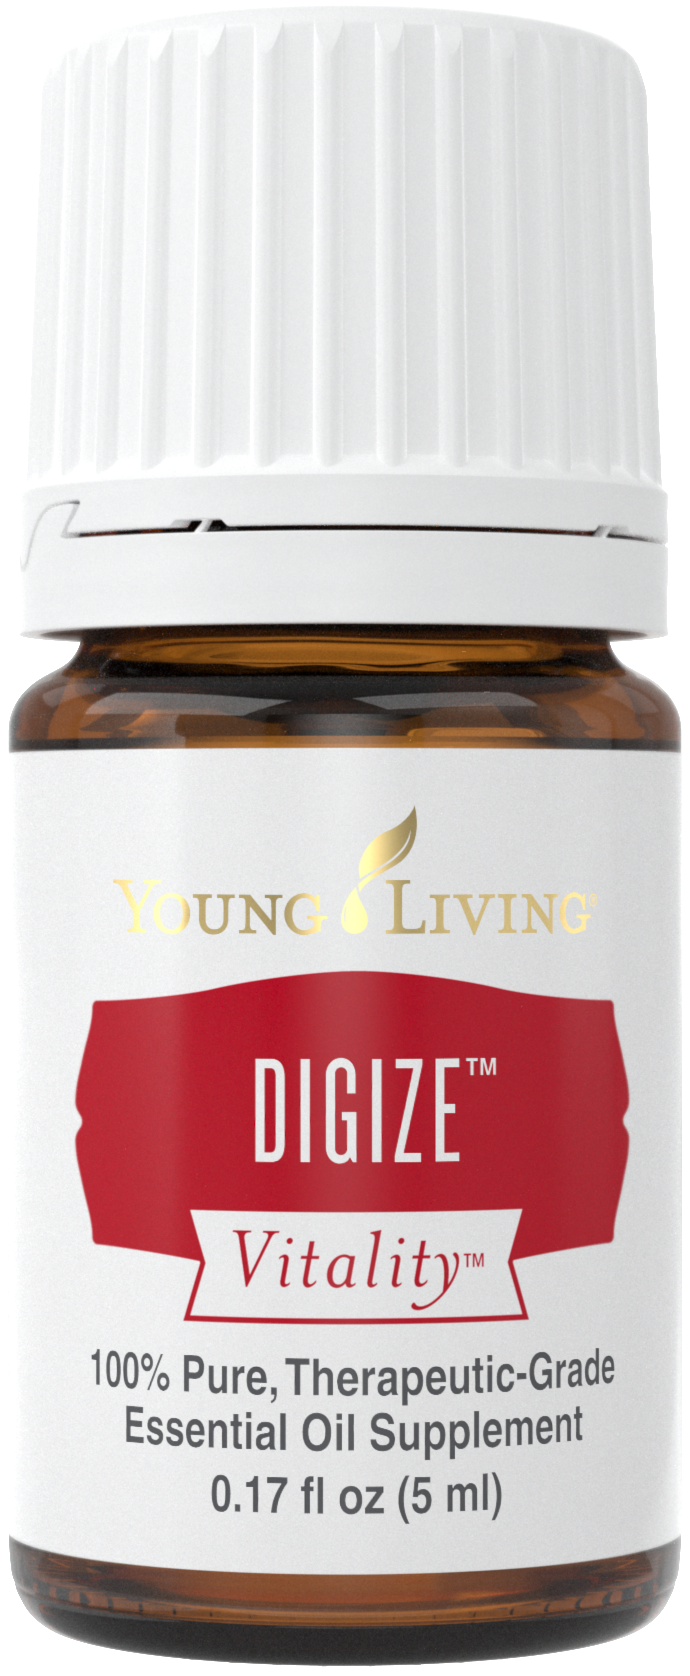 DiGize Vitality Silo.png